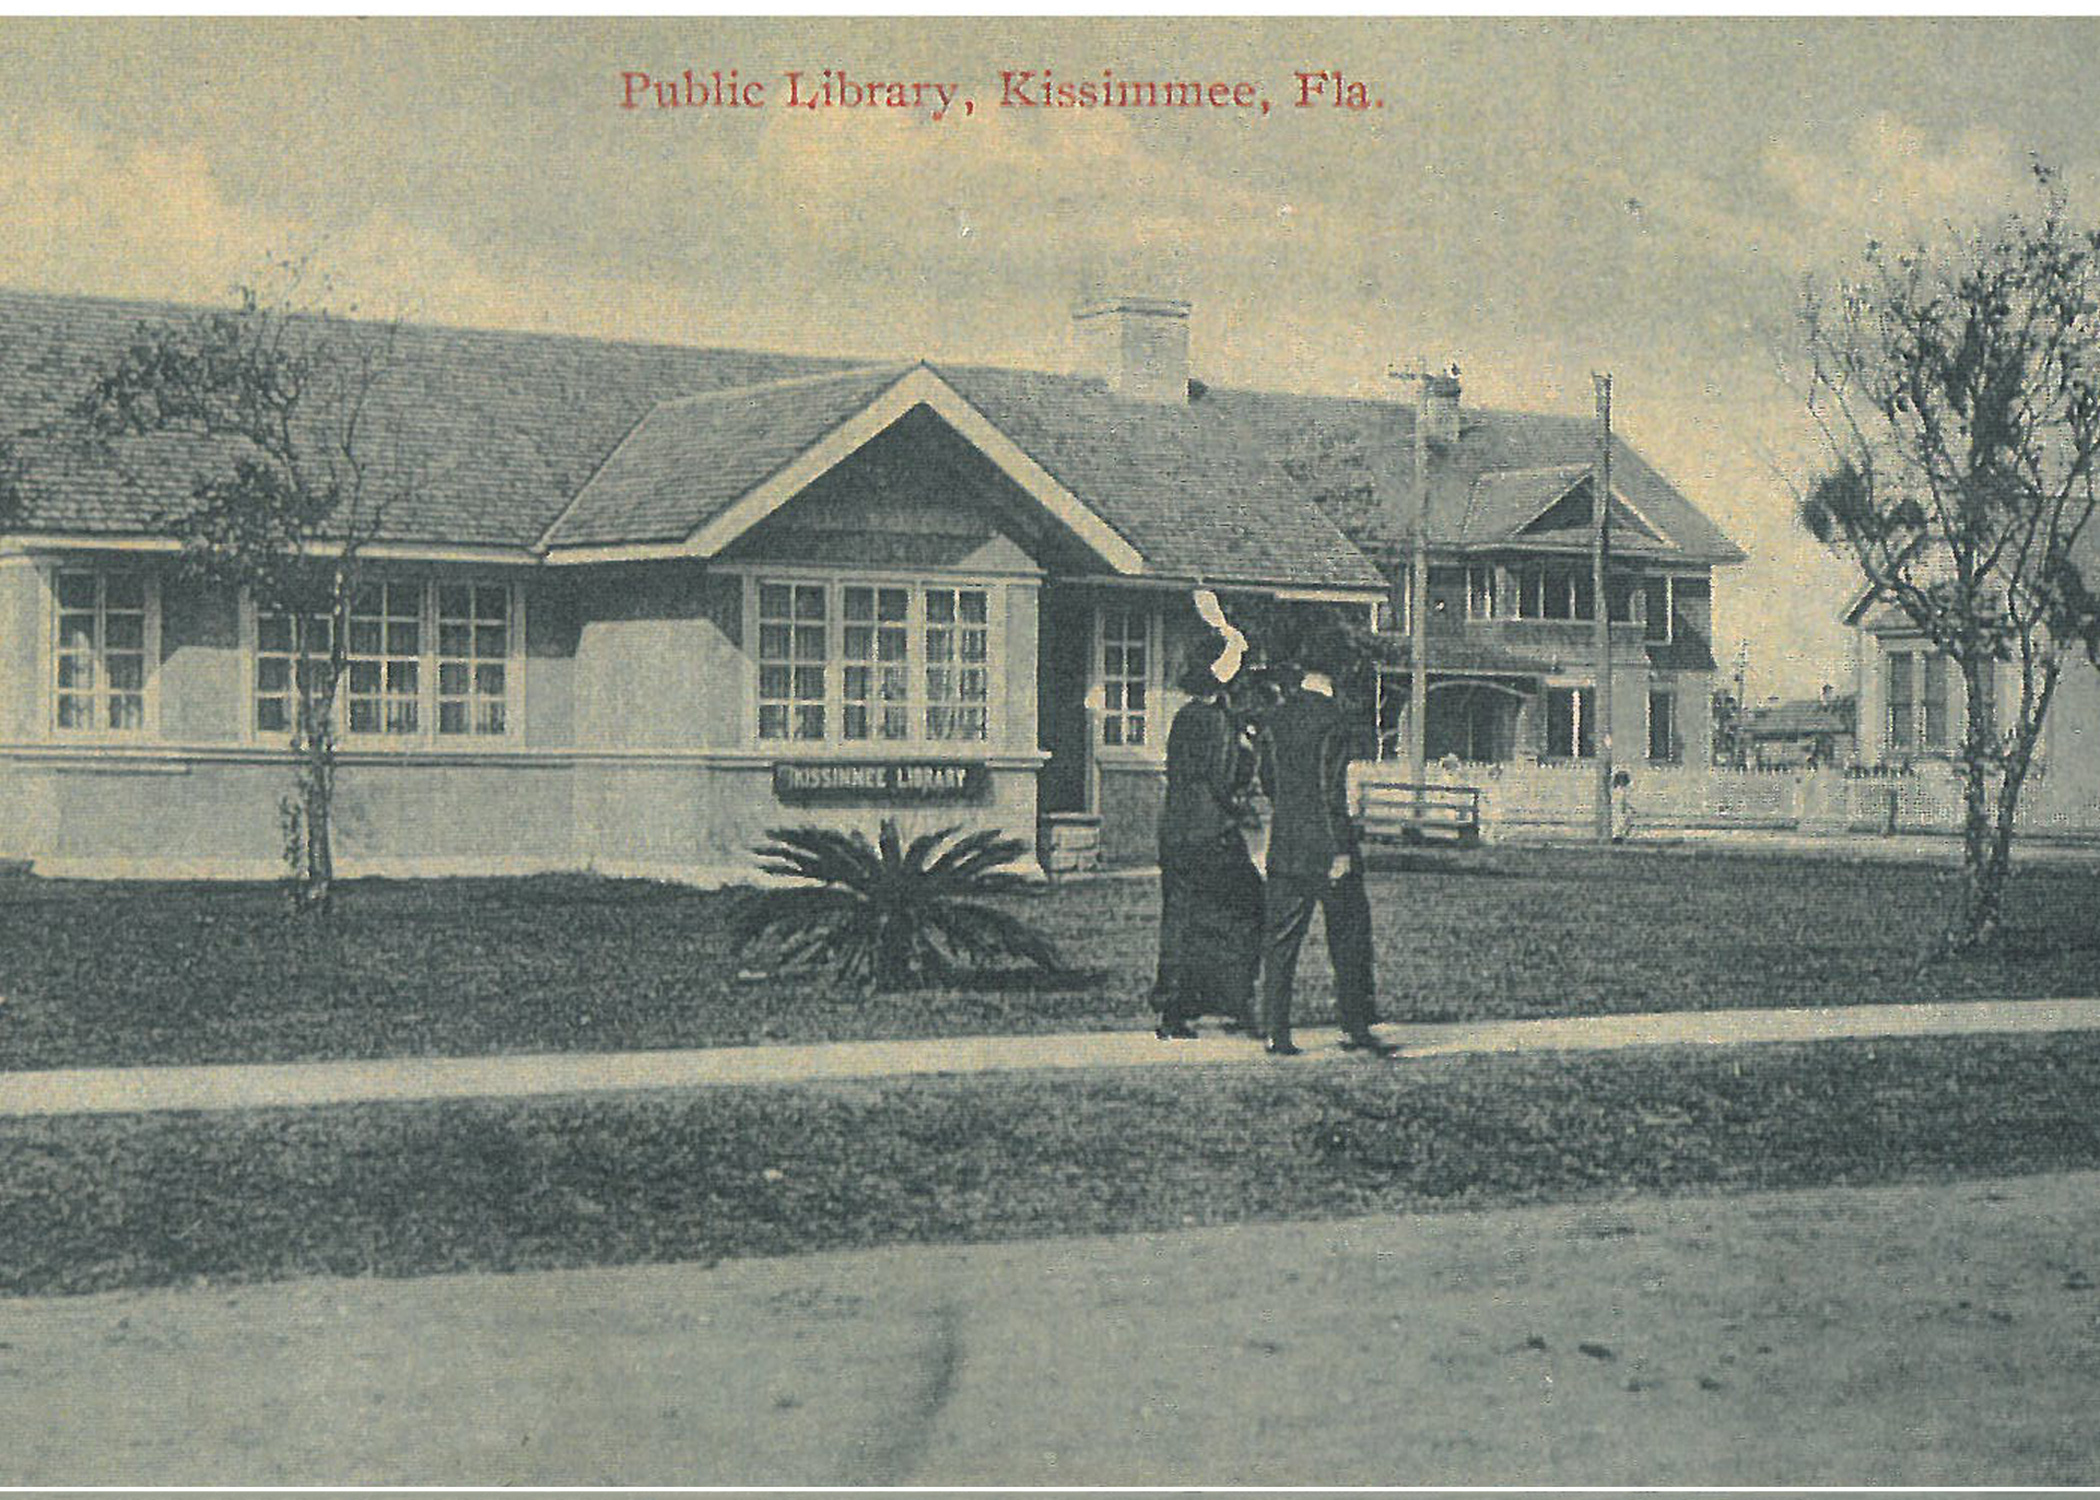 An old, yellowed photograph of a building. Two people walk on the sidewalk in front. Caption reads "Public Library, Kissimmee, FLA."